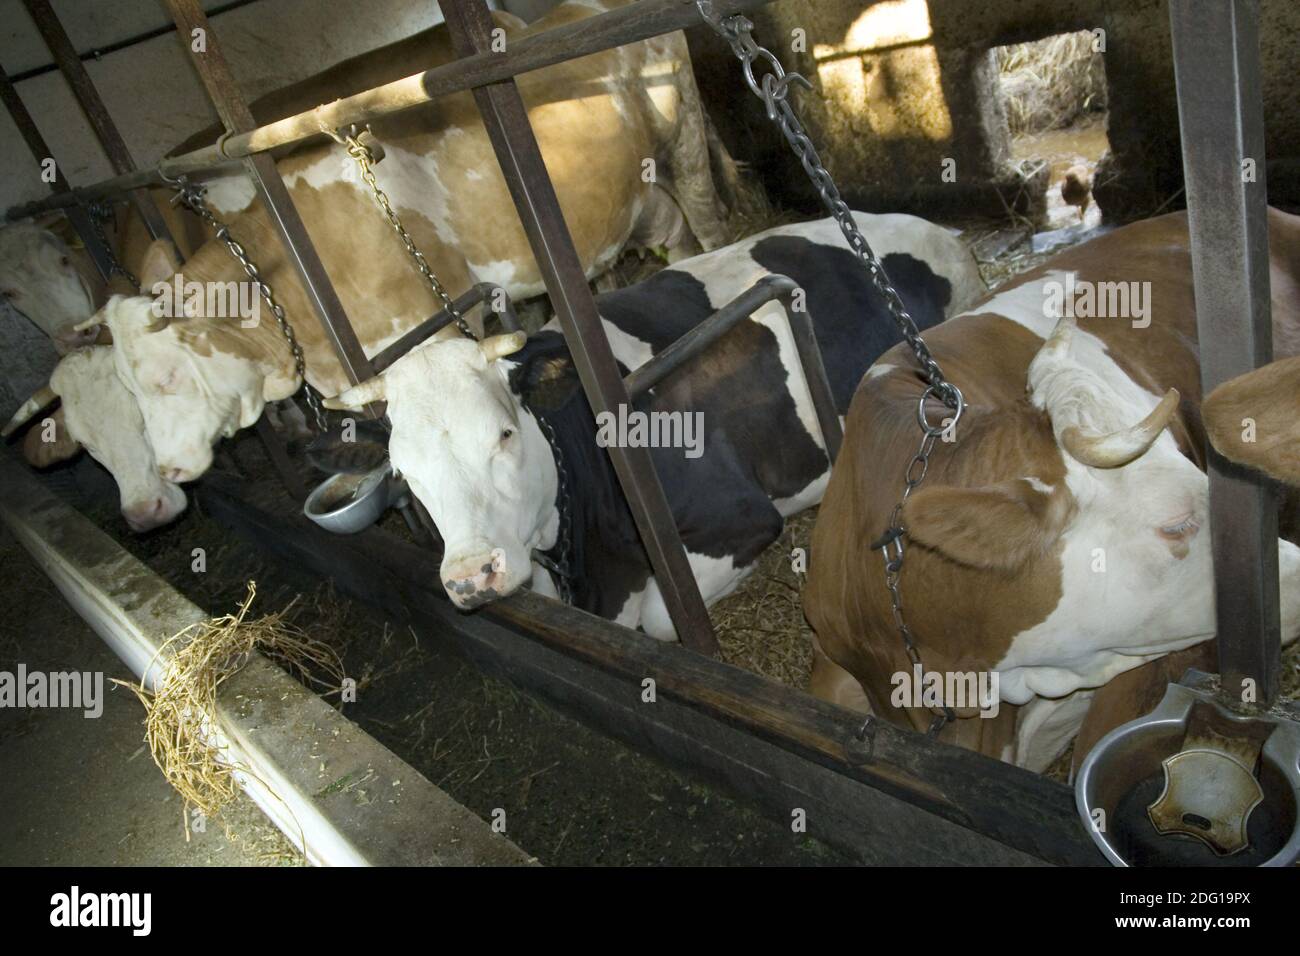 Cows in Stable Stock Photo